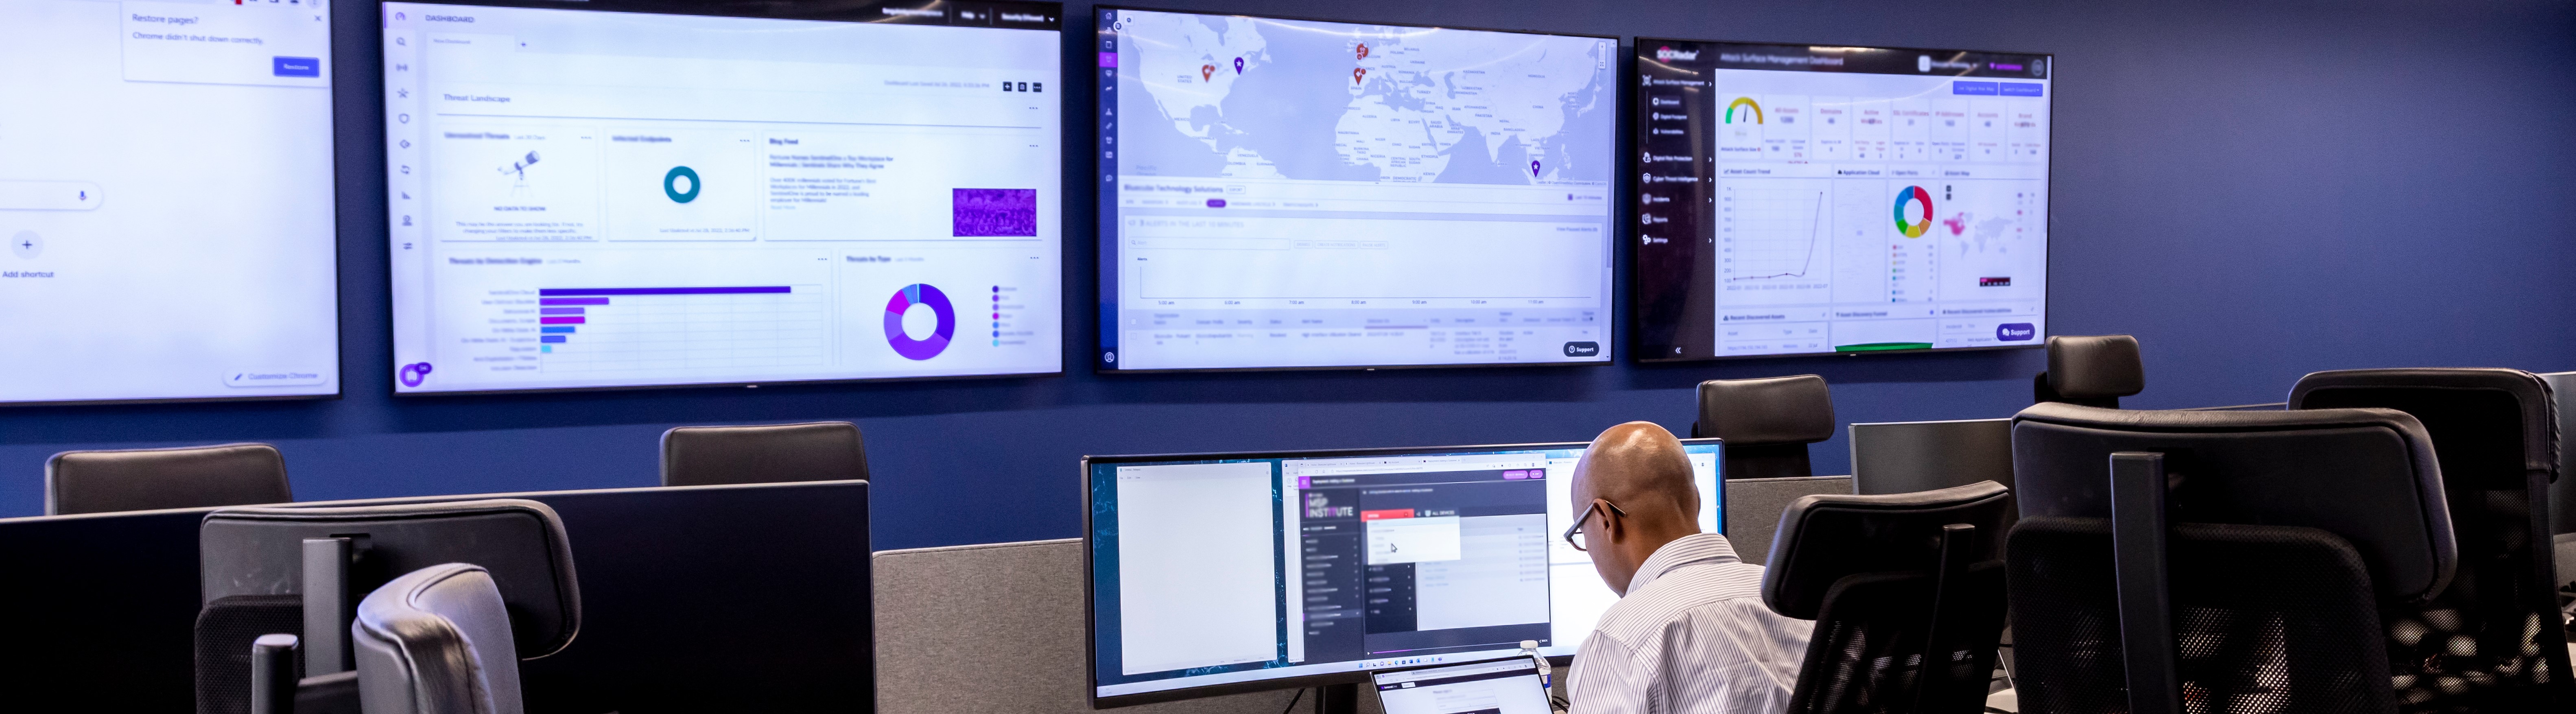 Security operations worker in front of multiple screens